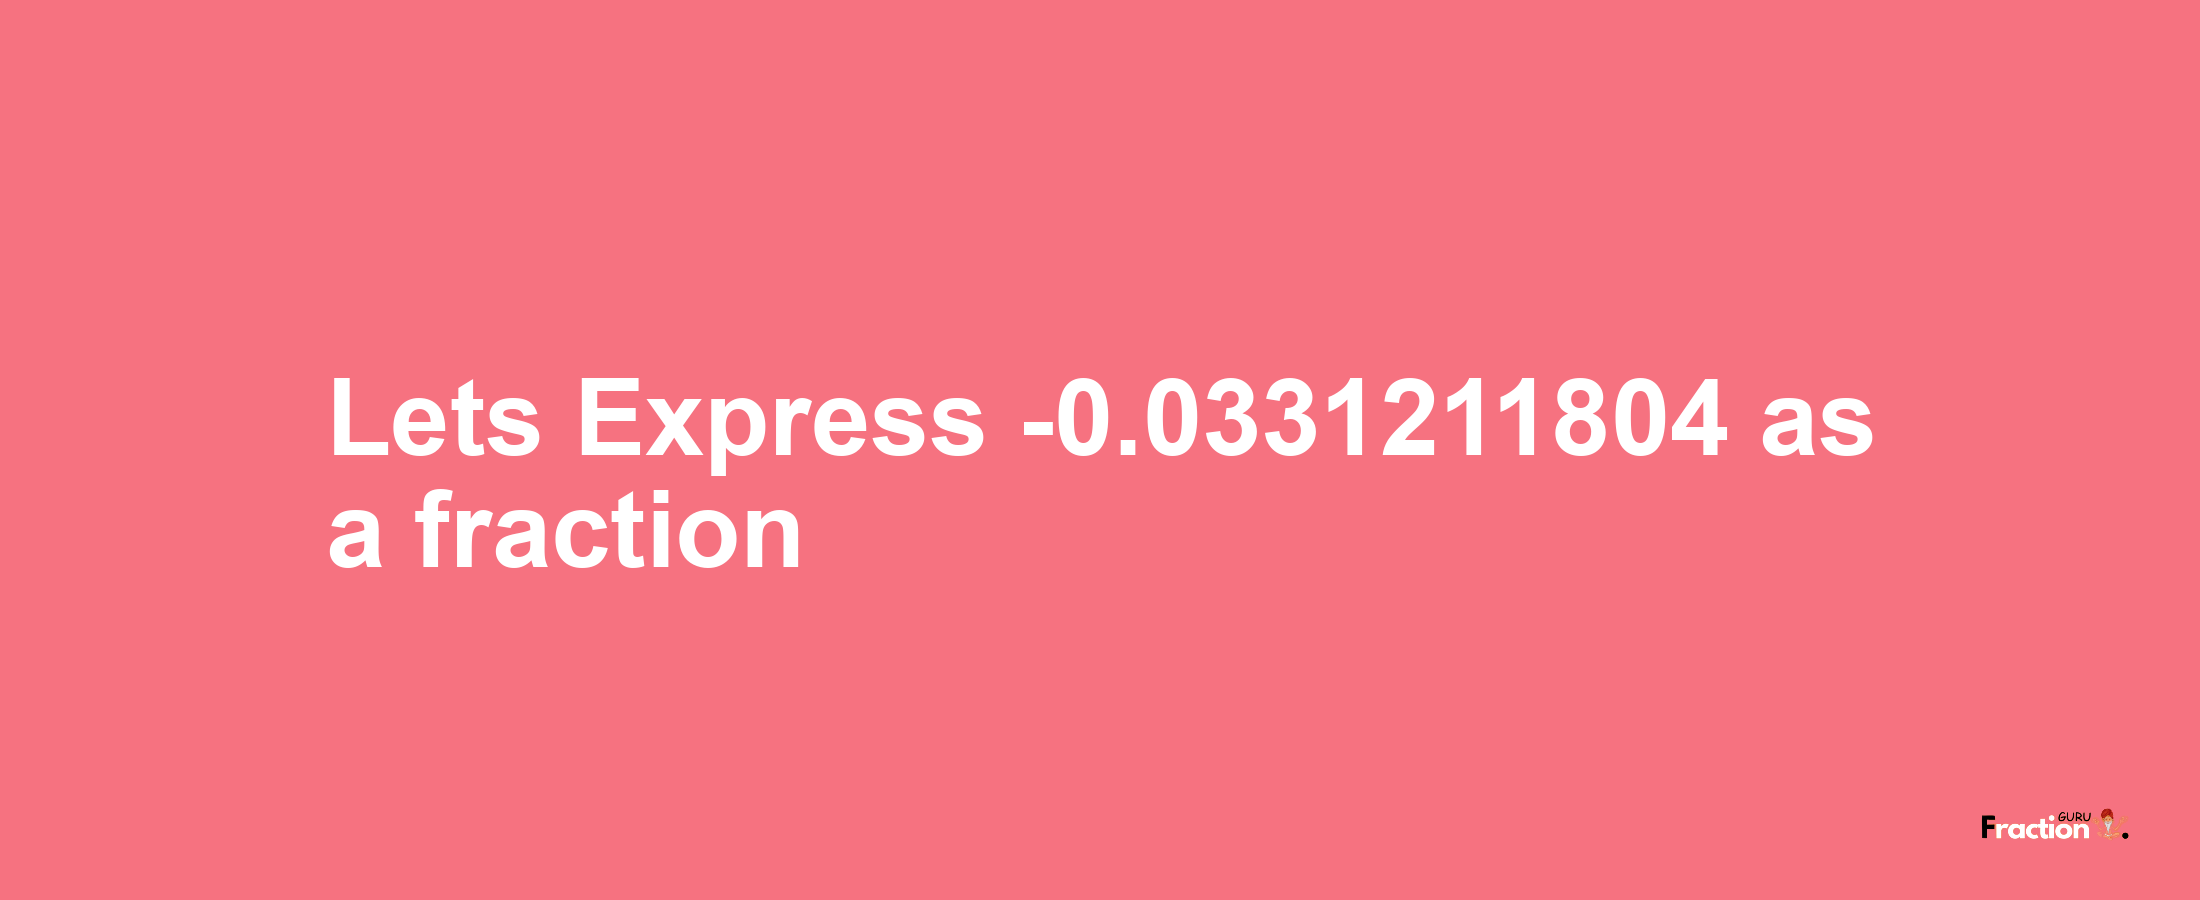 Lets Express -0.0331211804 as afraction